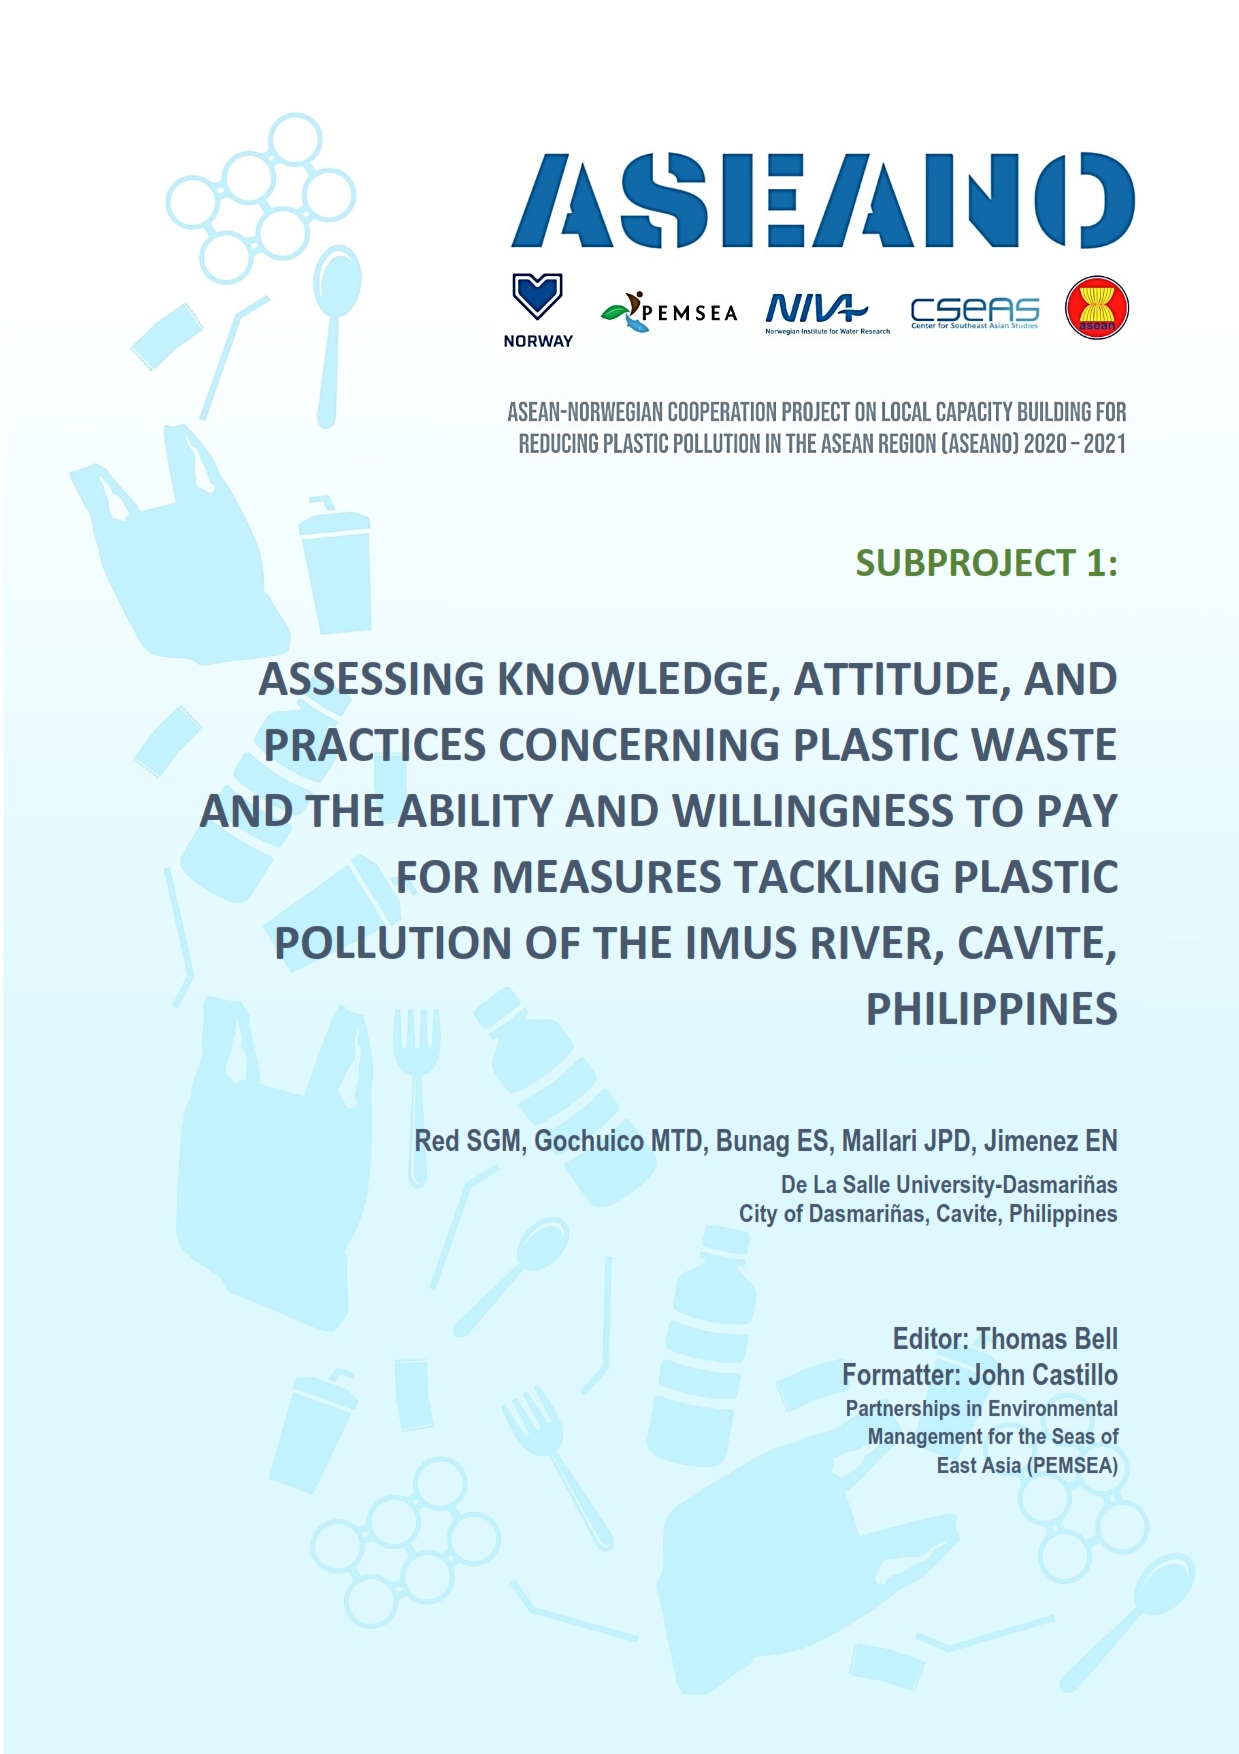 ASEANO Project Report: Assessing Knowledge, Attitudes and Practices Concerning Plastic Waste Along Imus River